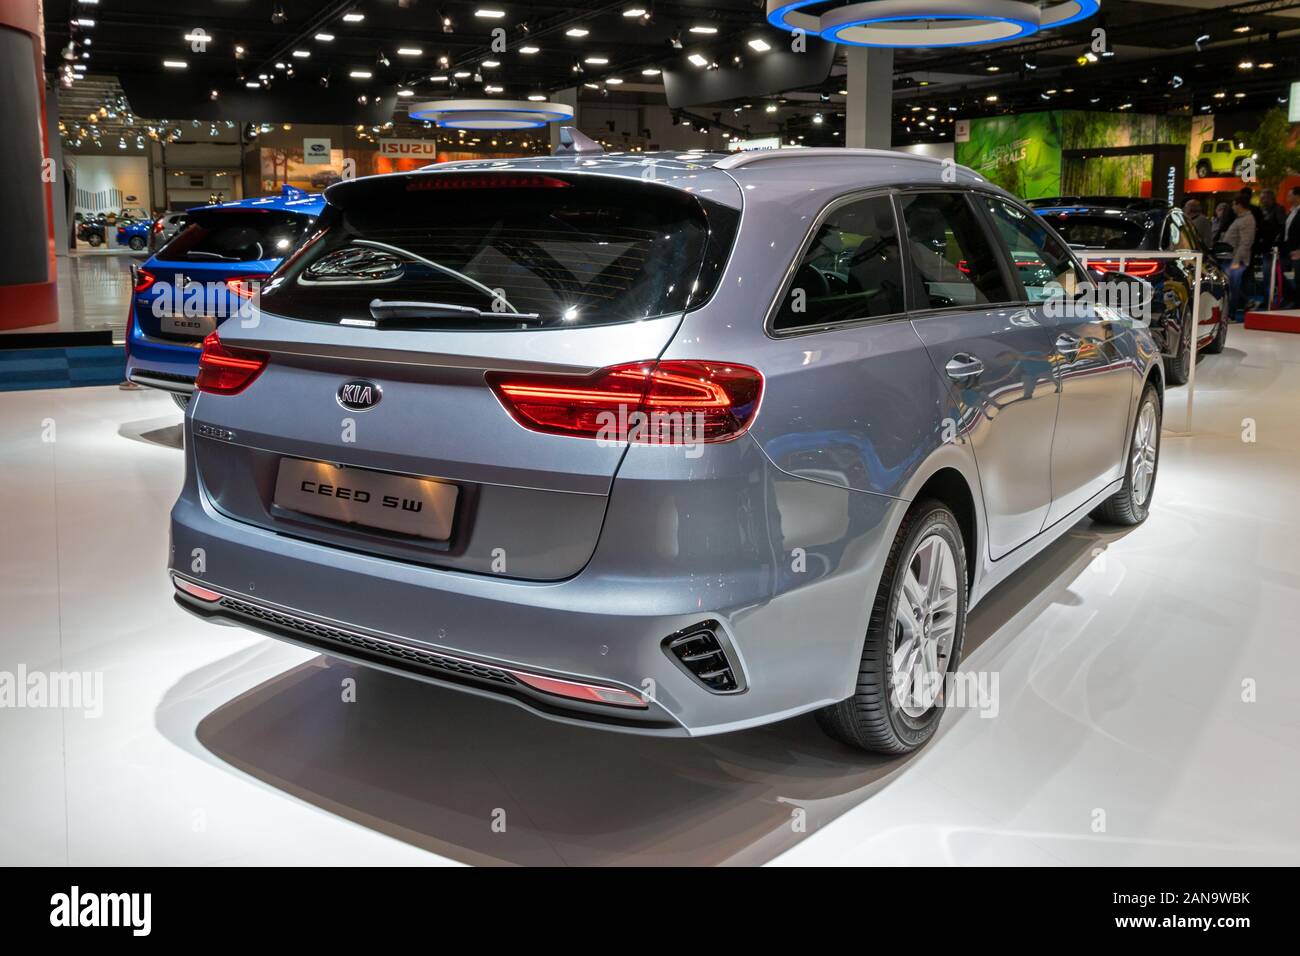 BRUSSELS - JAN 9, 2020: New Kia Ceed Sportswagon car model presented at the Brussels Autosalon 2020 Motor Show. Stock Photo